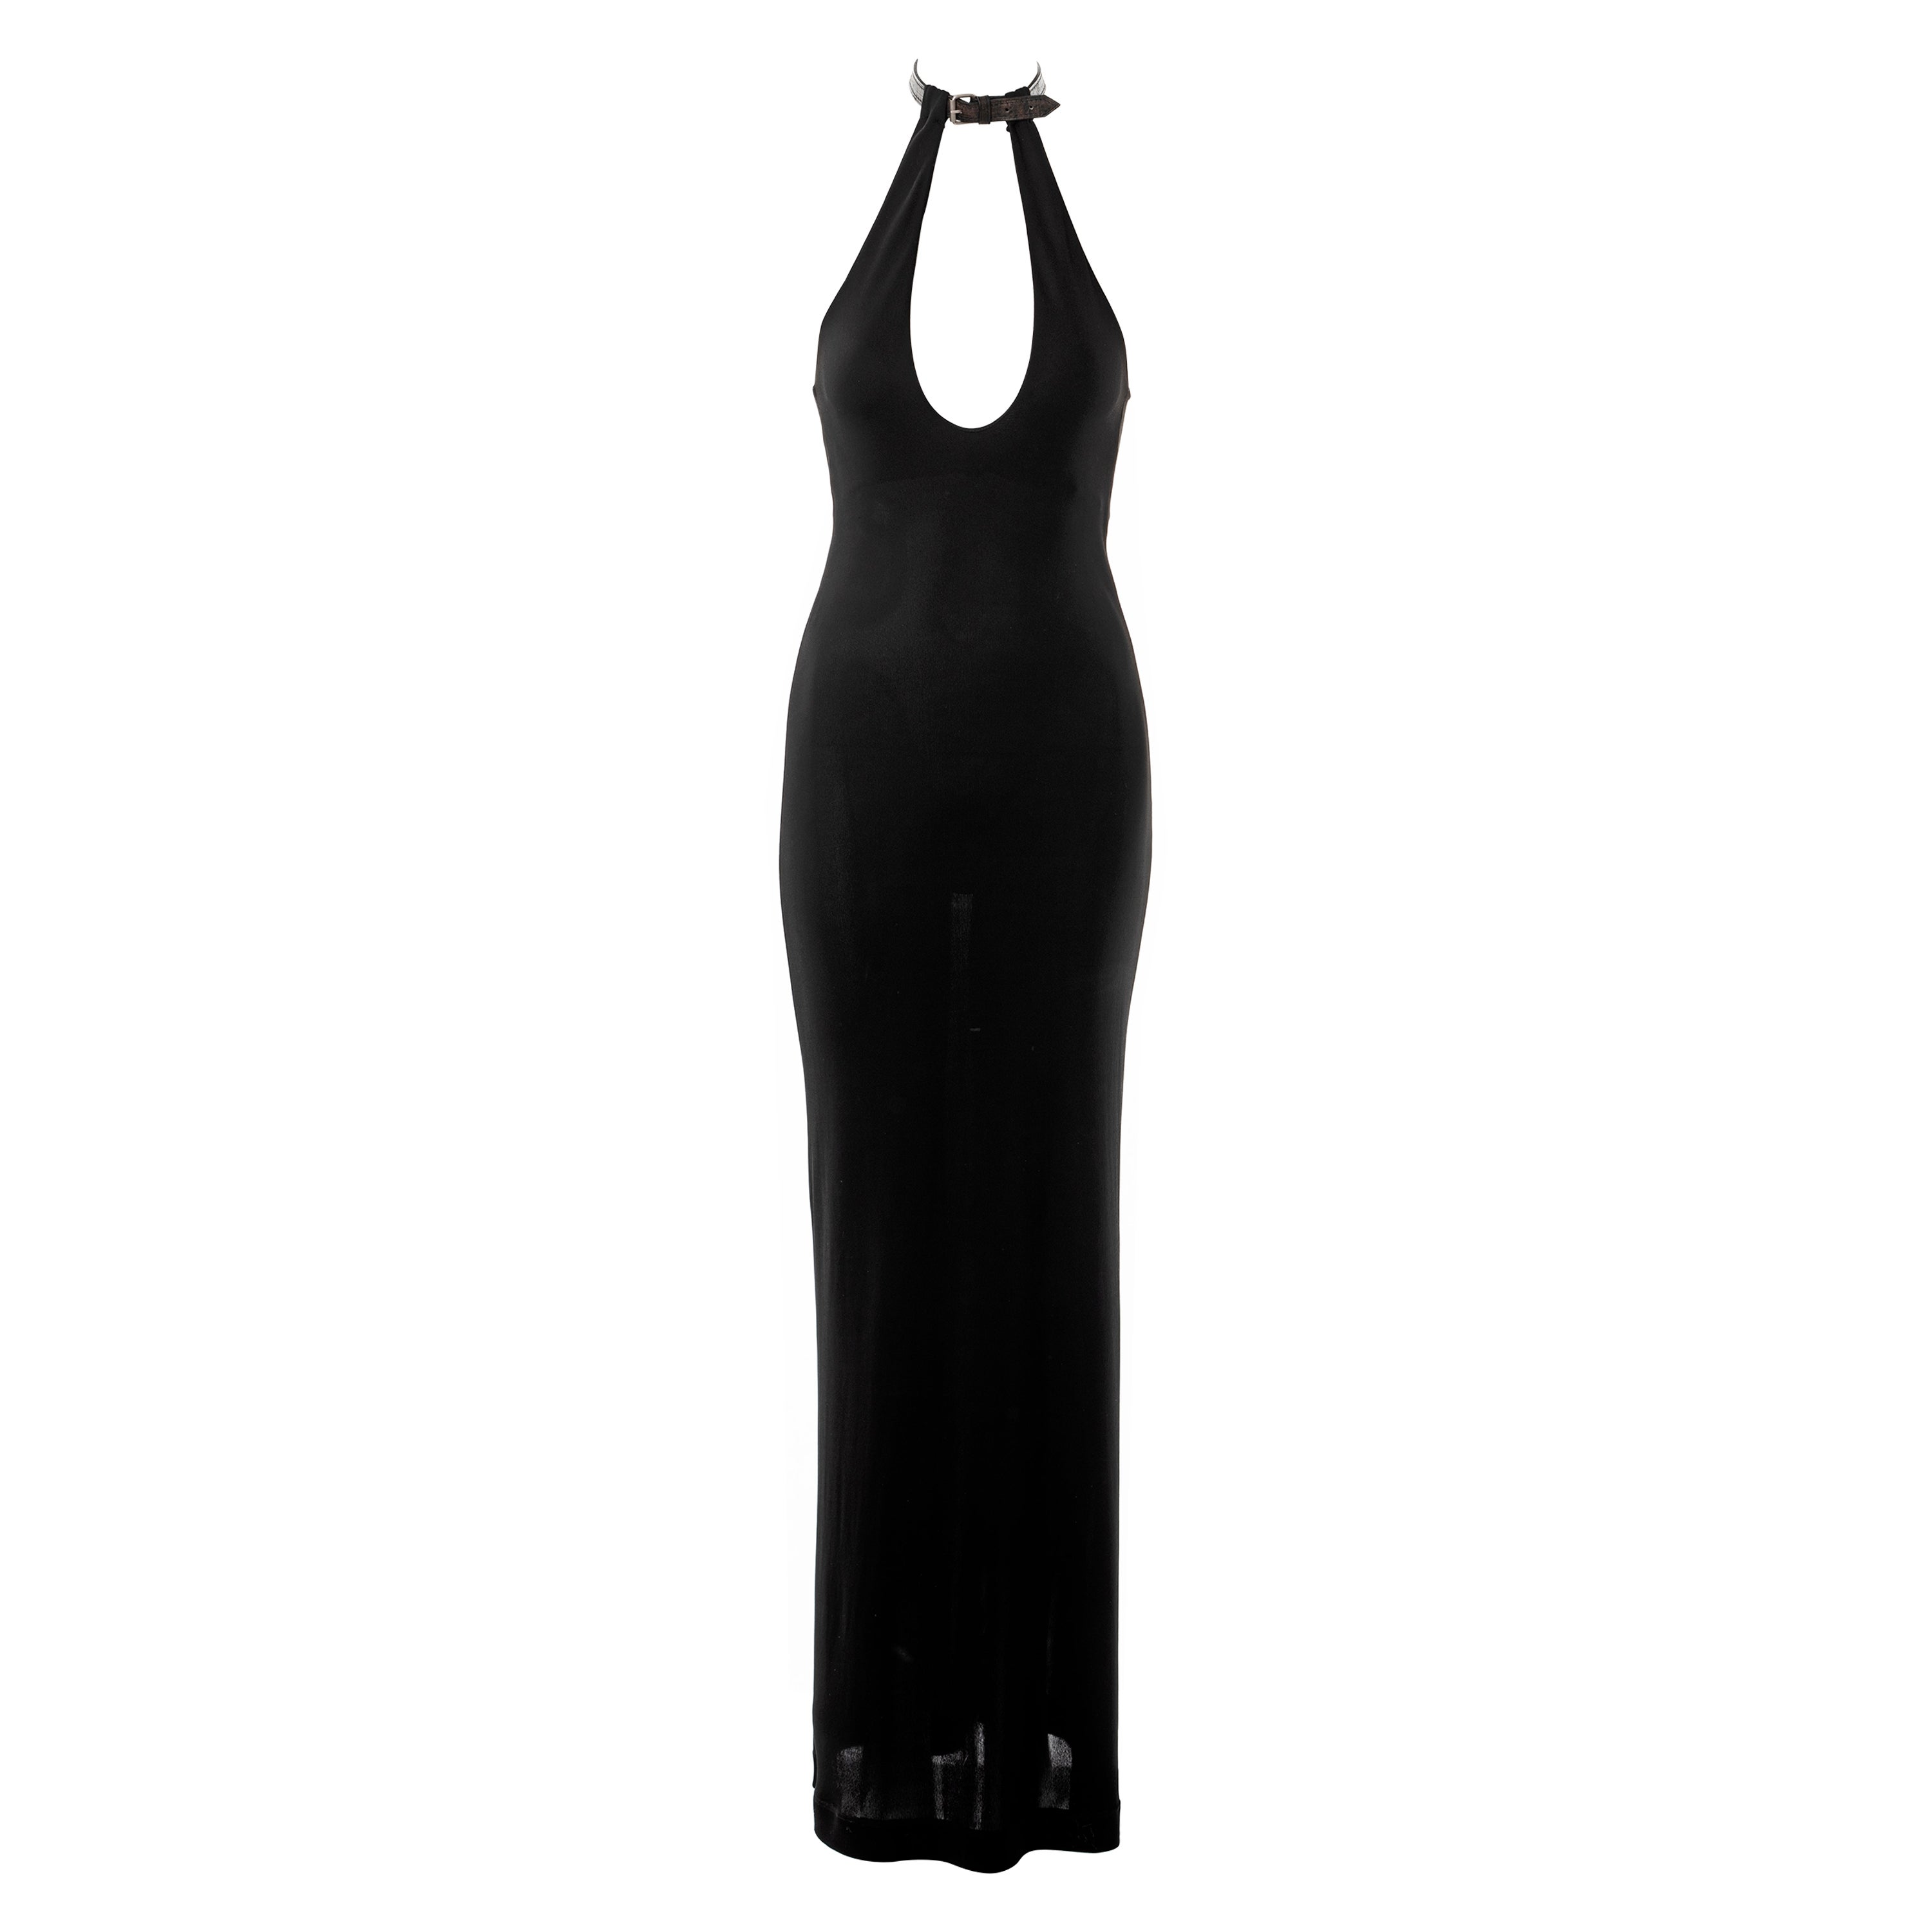 Jean Paul Gaultier black rayon maxi dress with leather choker, ss 2001 For Sale